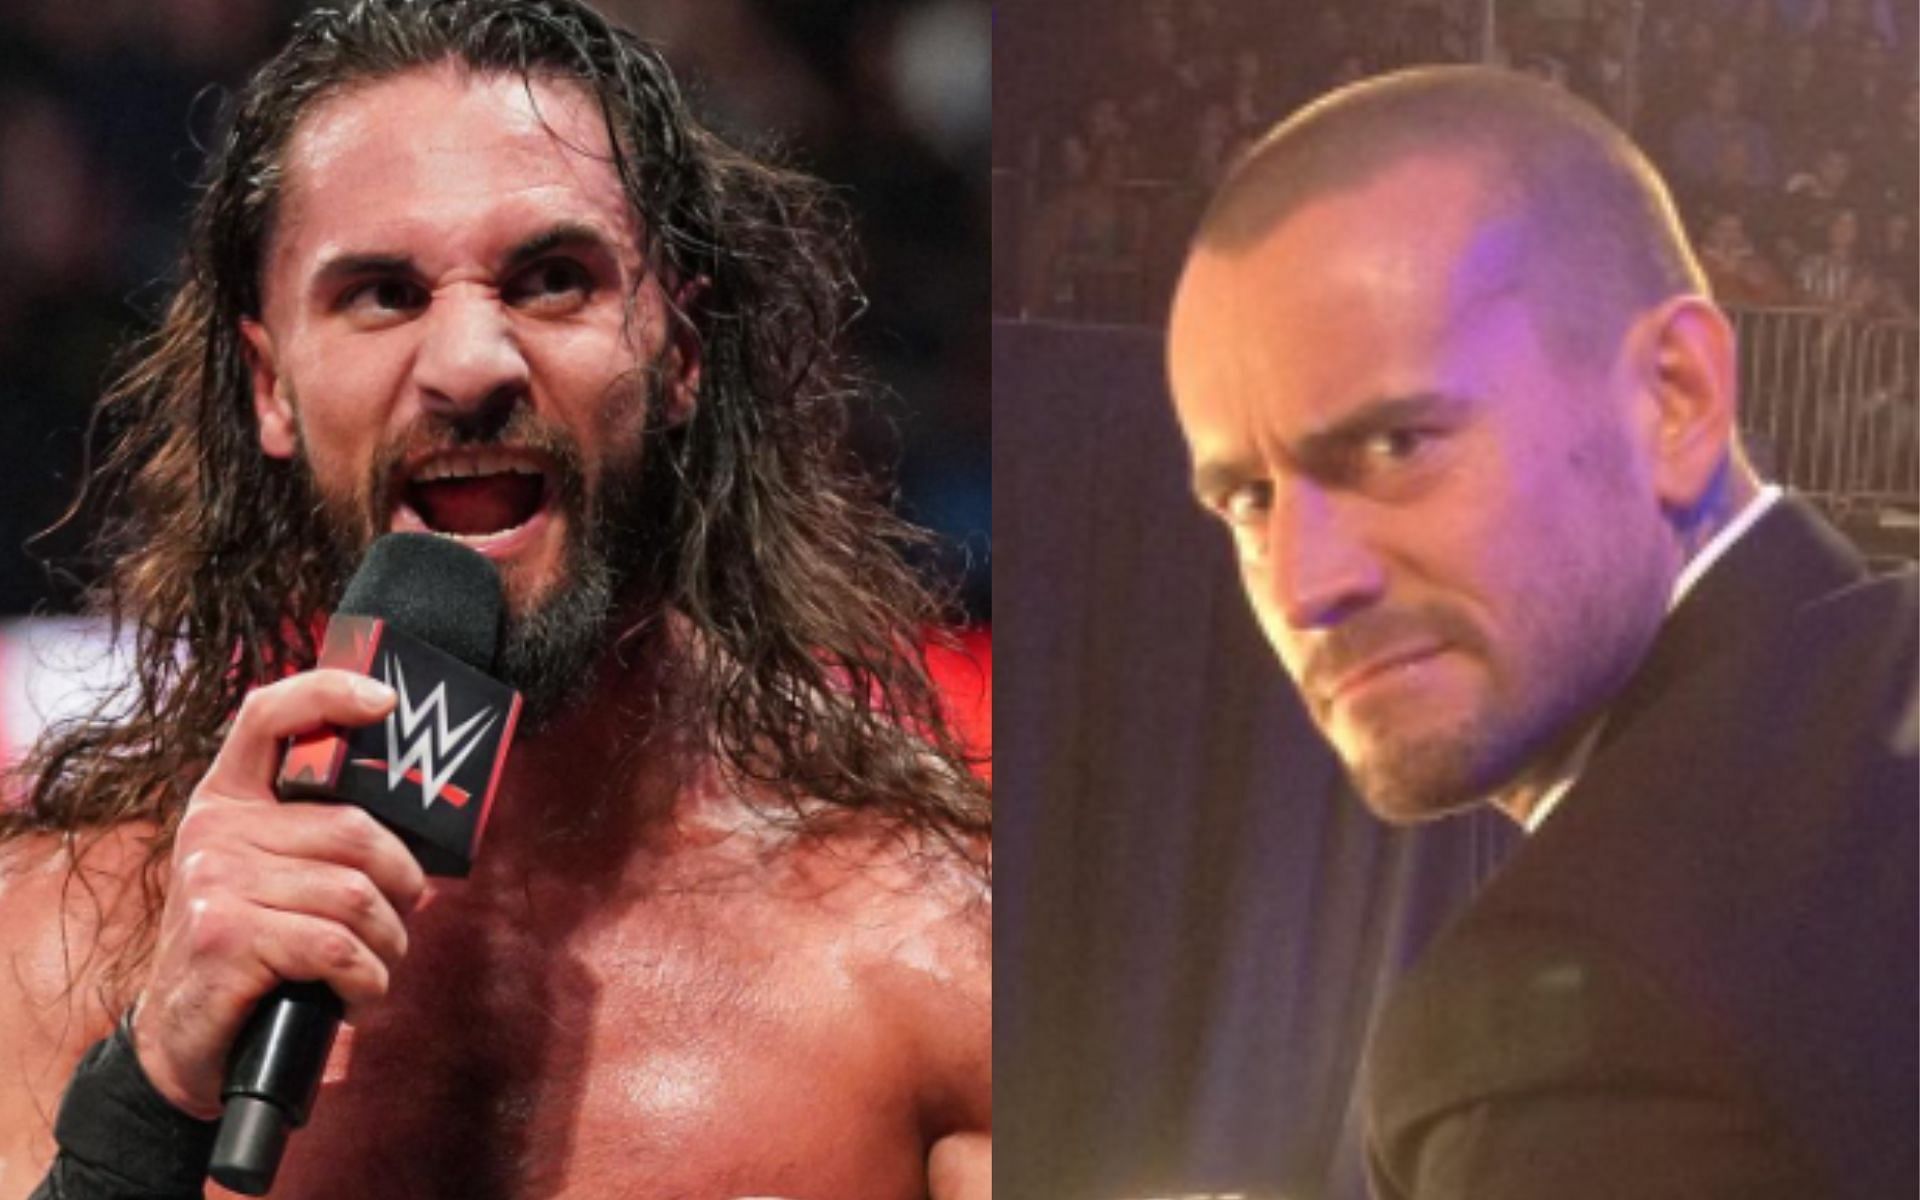 Seth Rollins and CM Punk were set to compete in a blockbuster singles match that never took place